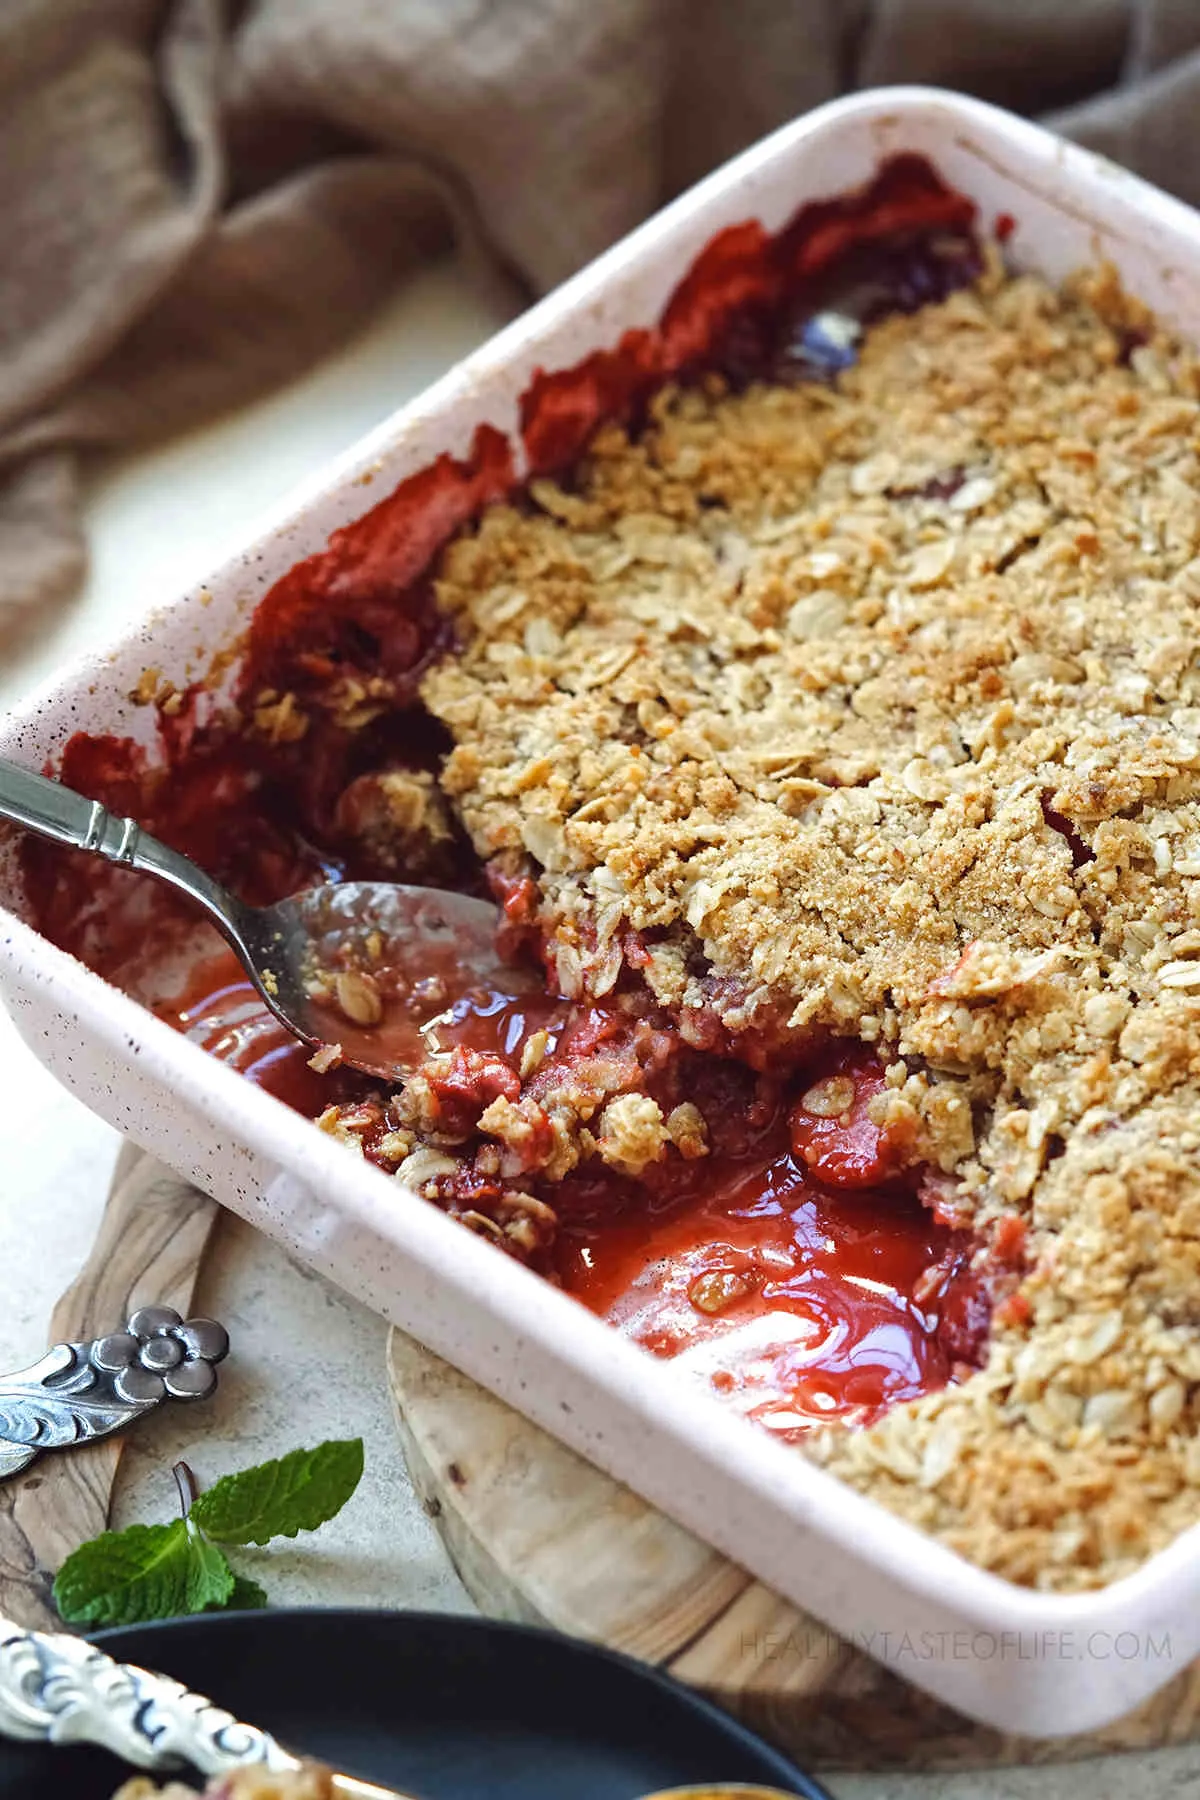  Picture showing the Juicy caramelized strawberry layer peaking beneath the crisp topping.